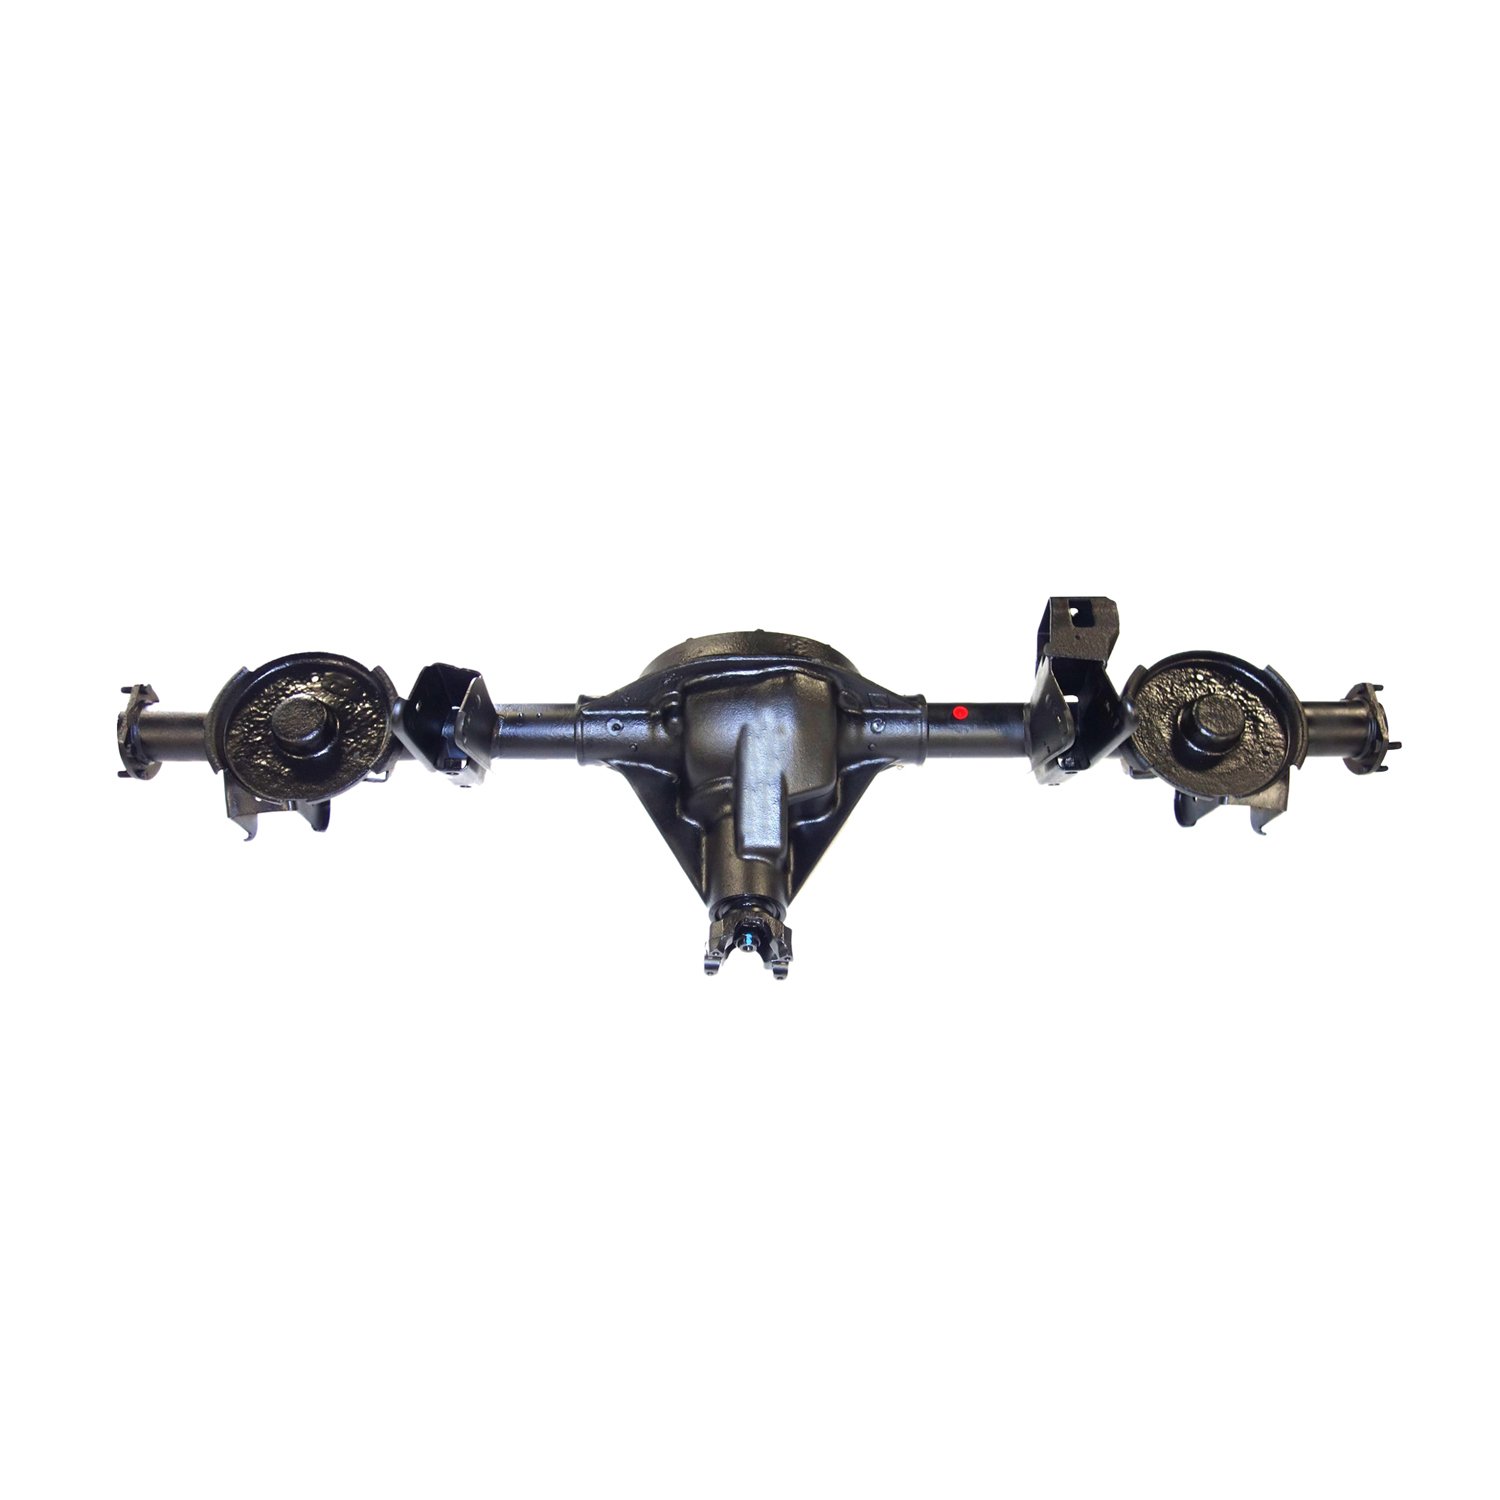 Remanufactured Complete Axle Assy for Dana 35 2002 Liberty 4.11 , 3.7l with ABS, Posi LSD